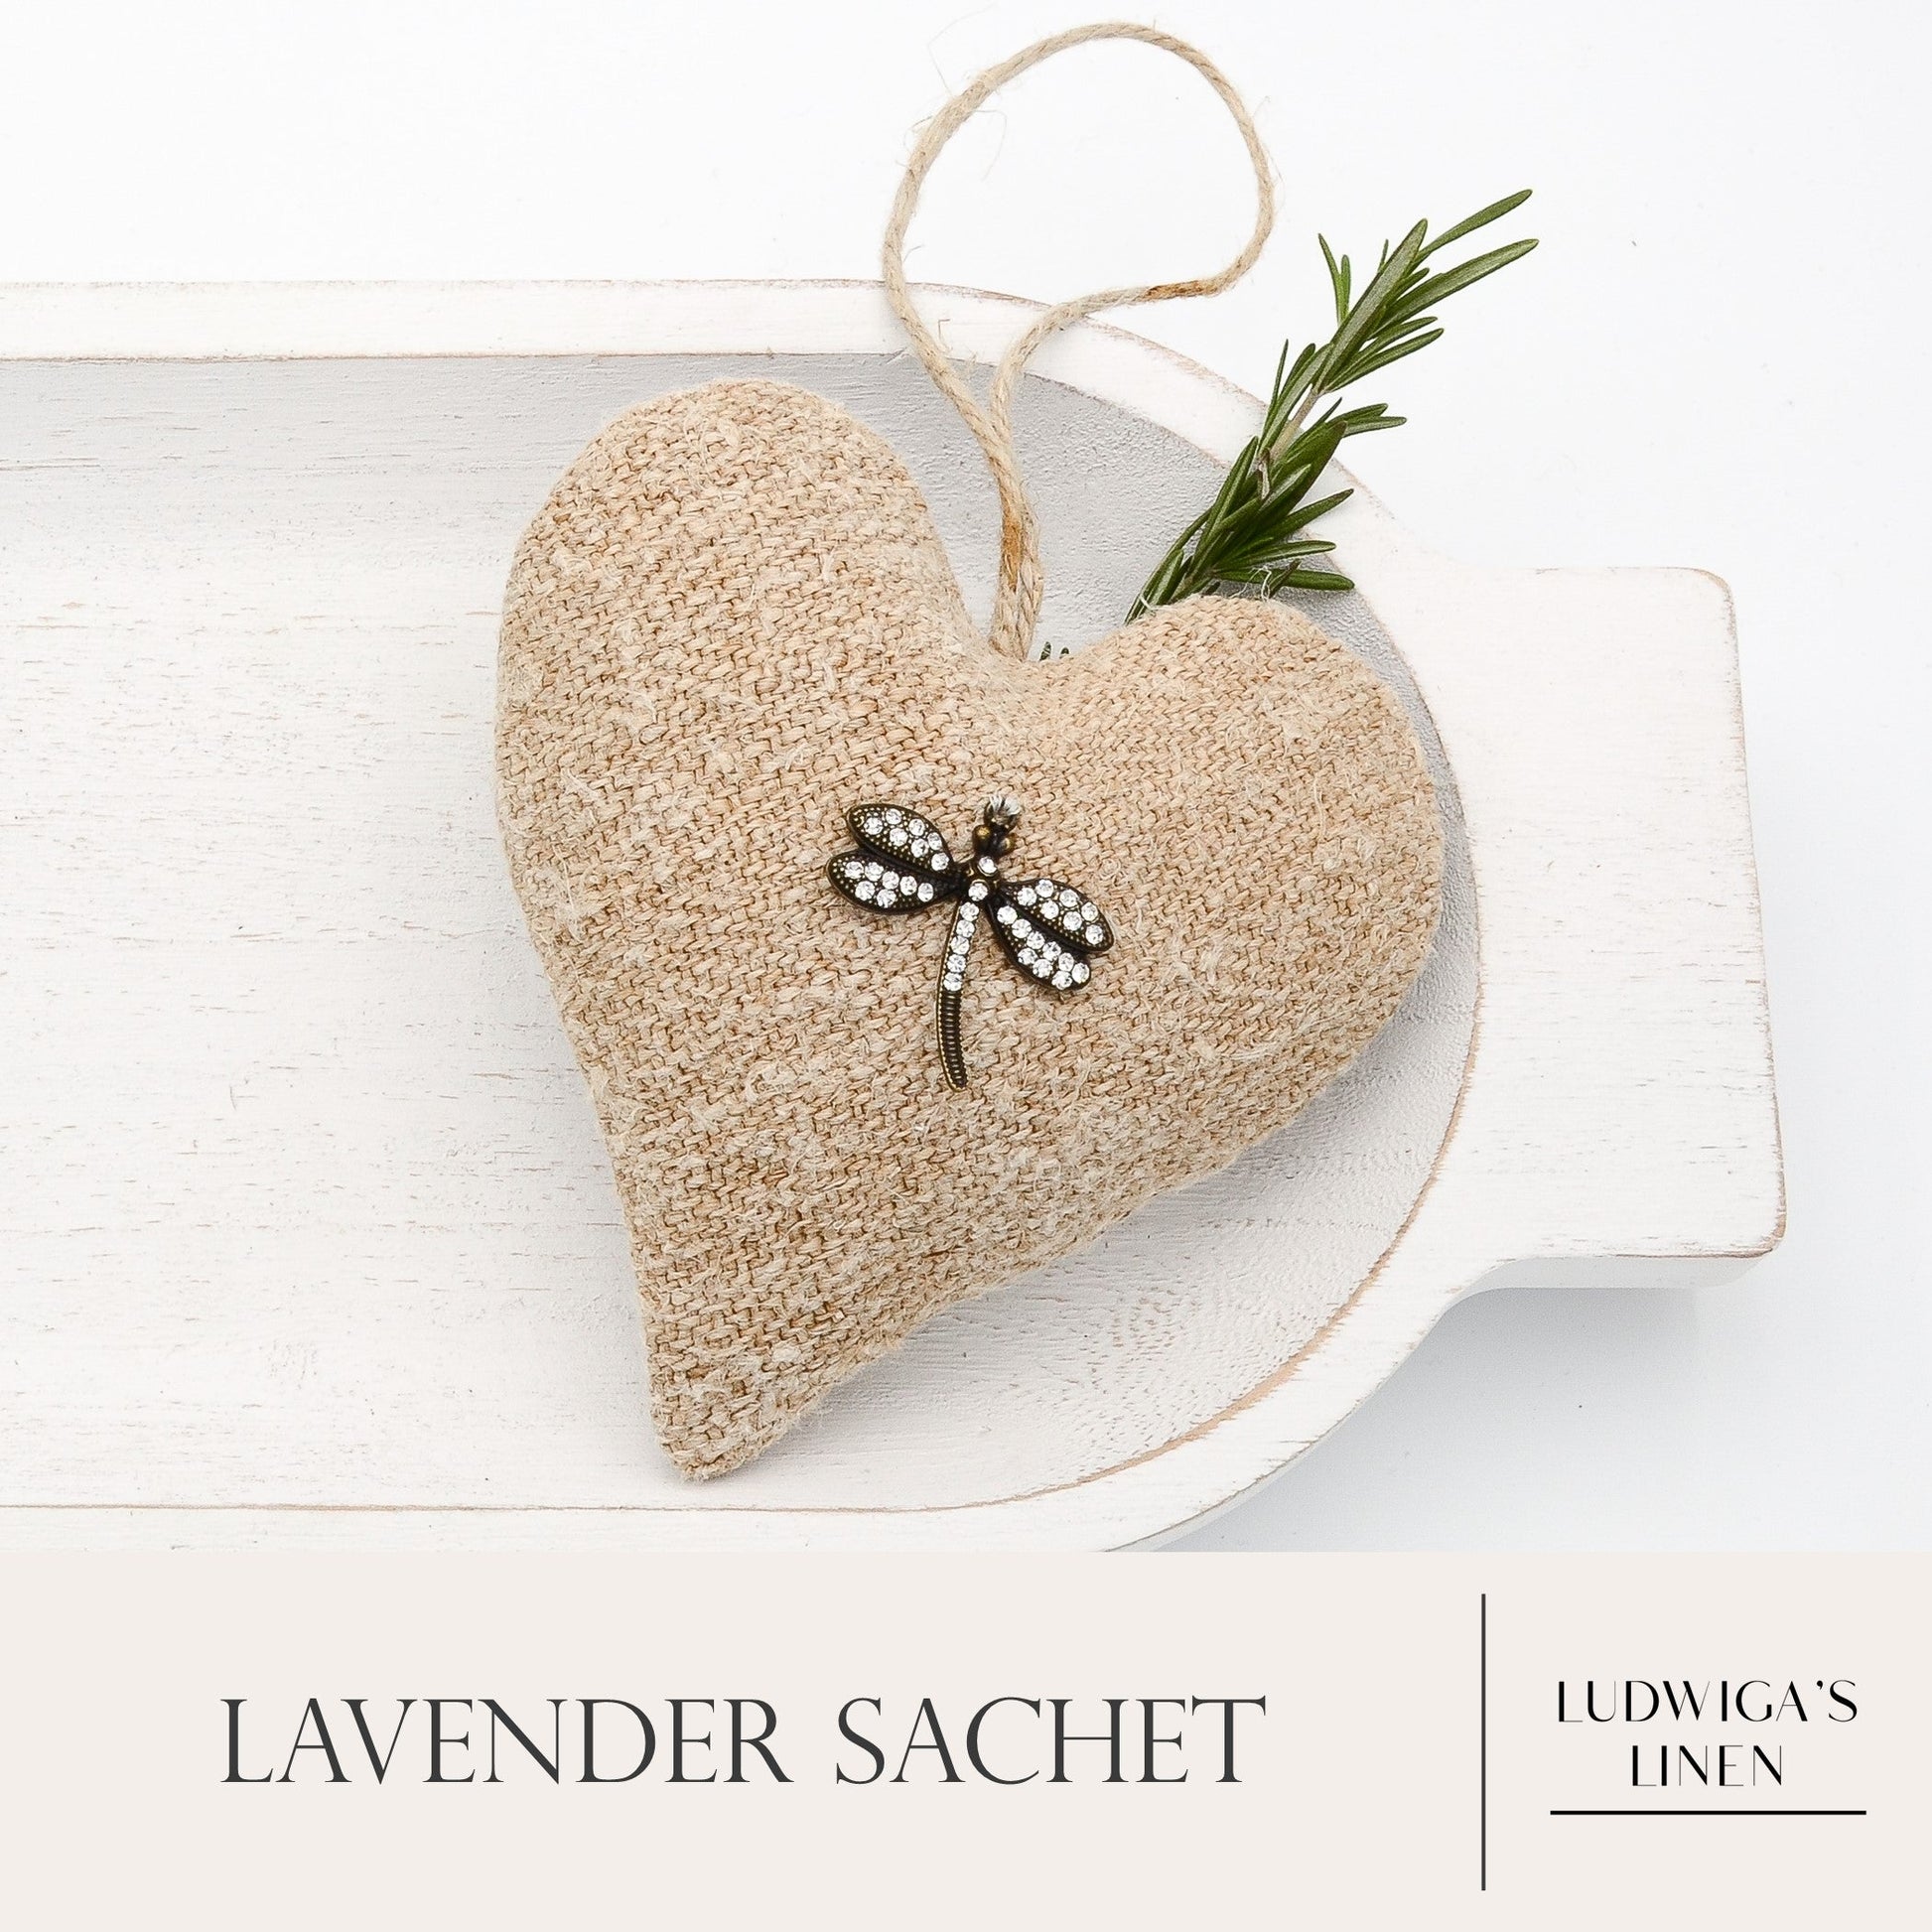 Lavender sachet heart made from antique European grain sack linen, charm, hemp twine tie, and filled with high quality lavender from Provence France